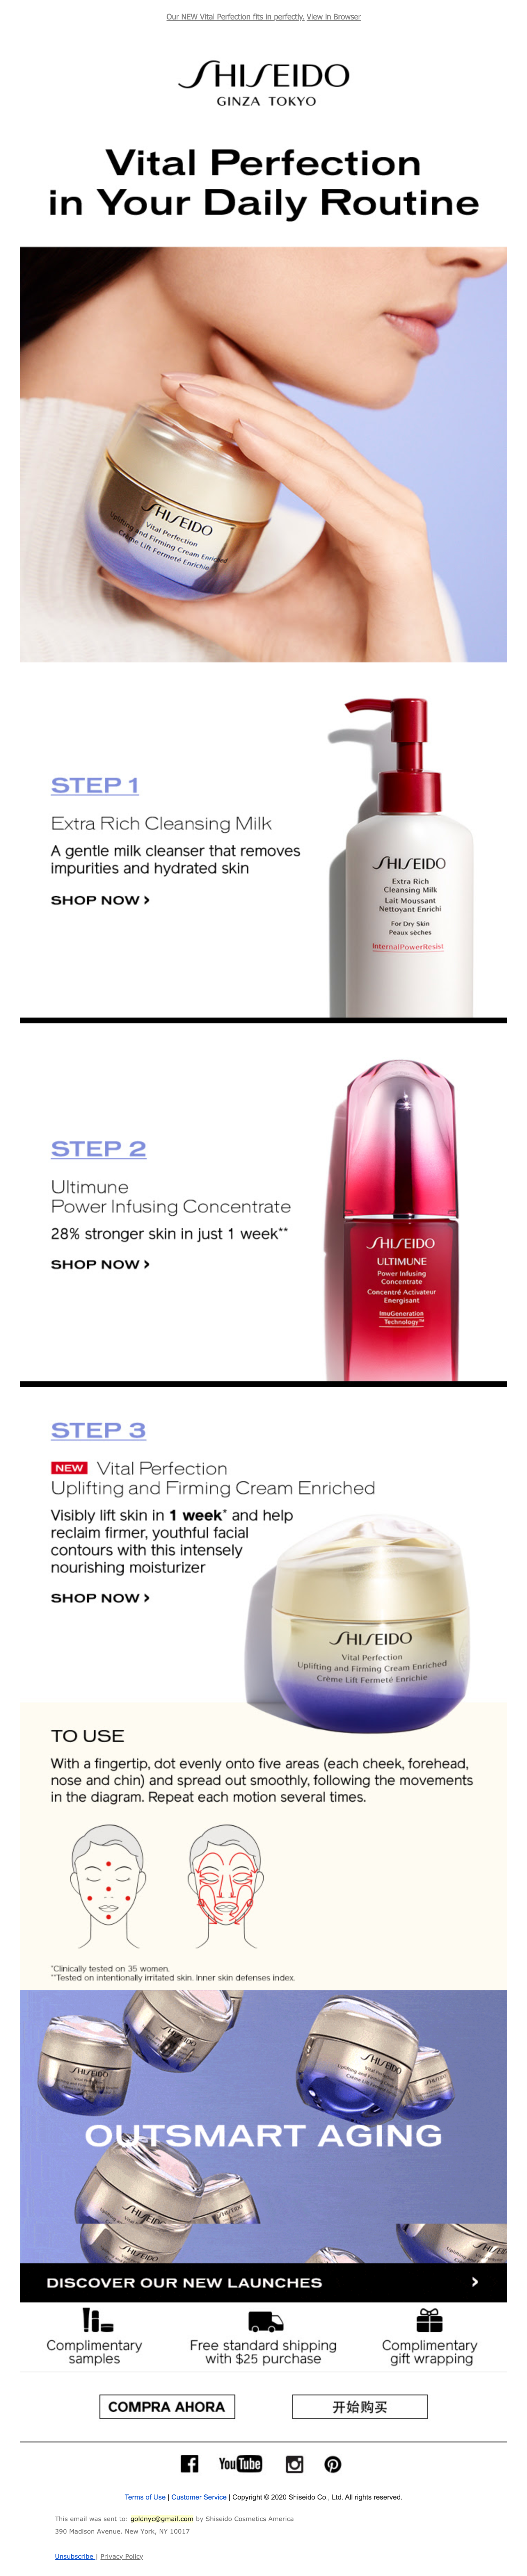 shiseido email 2.png